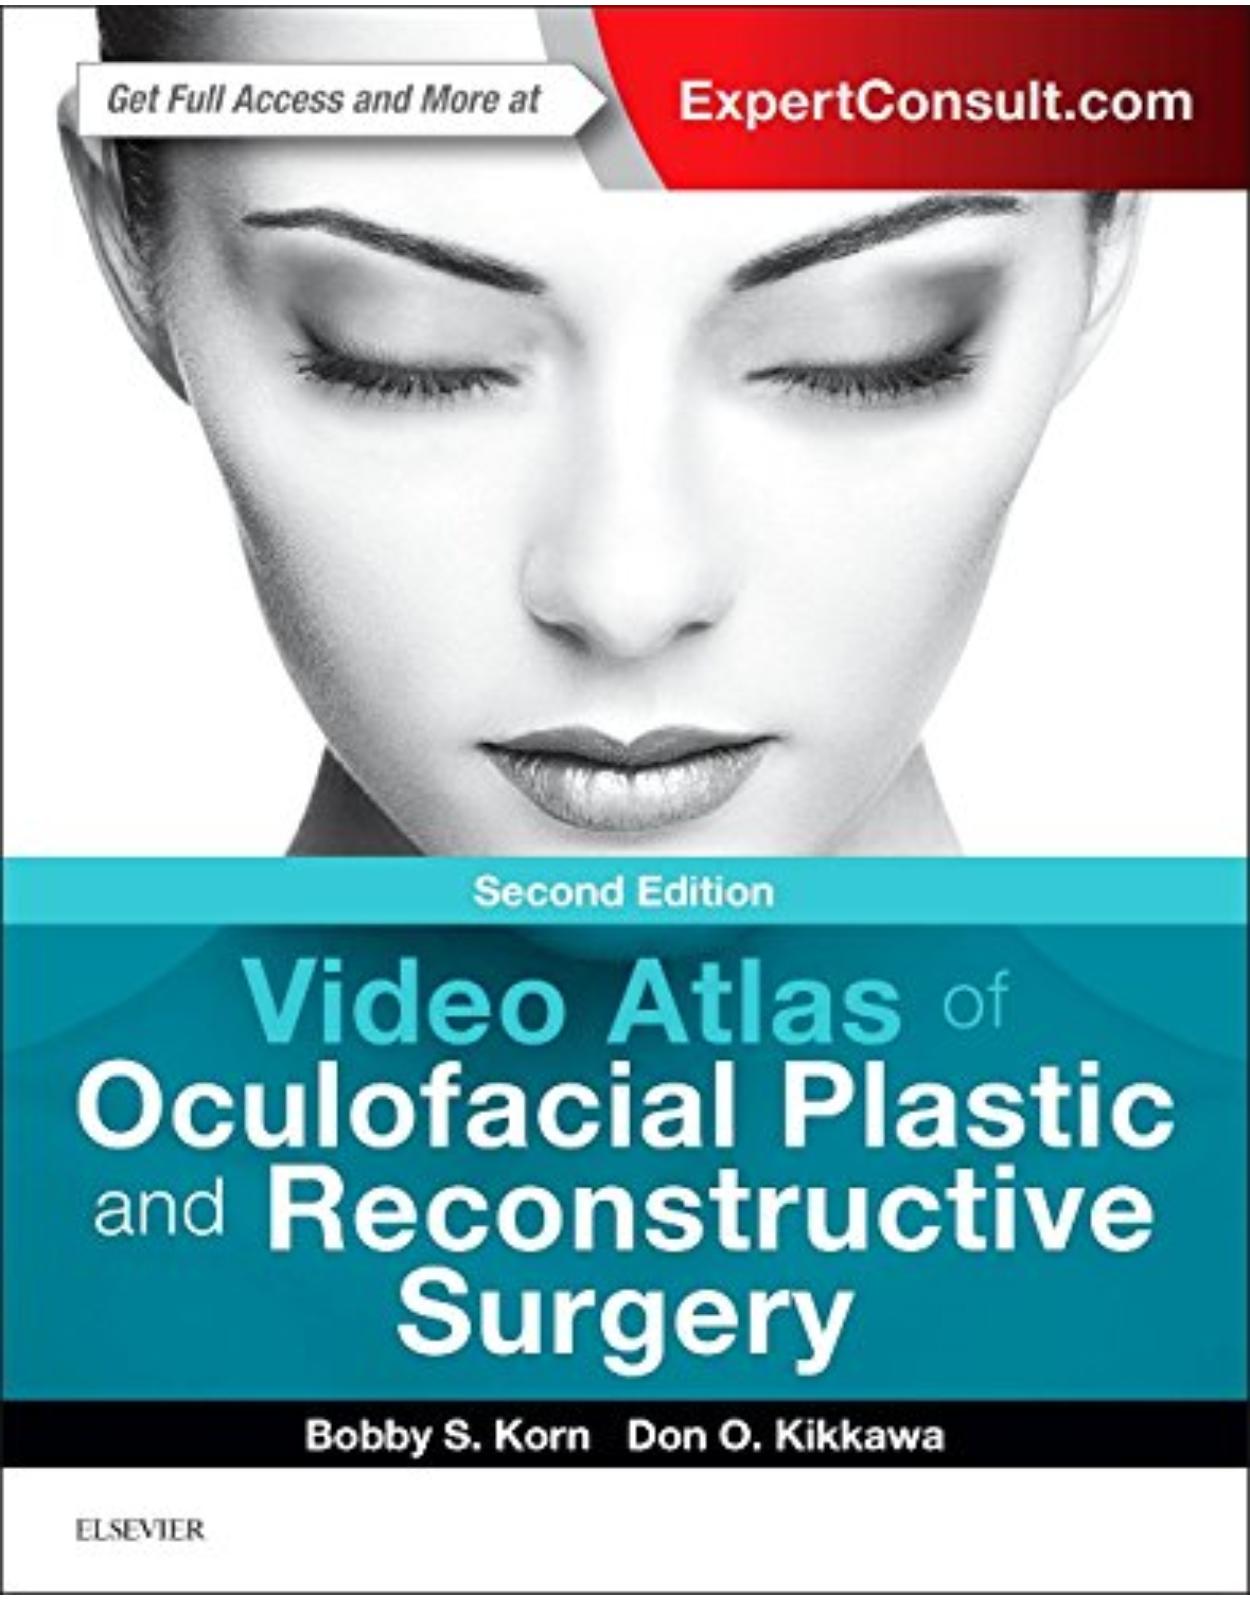 Video Atlas of Oculofacial Plastic and Reconstructive Surgery , 2nd Edition